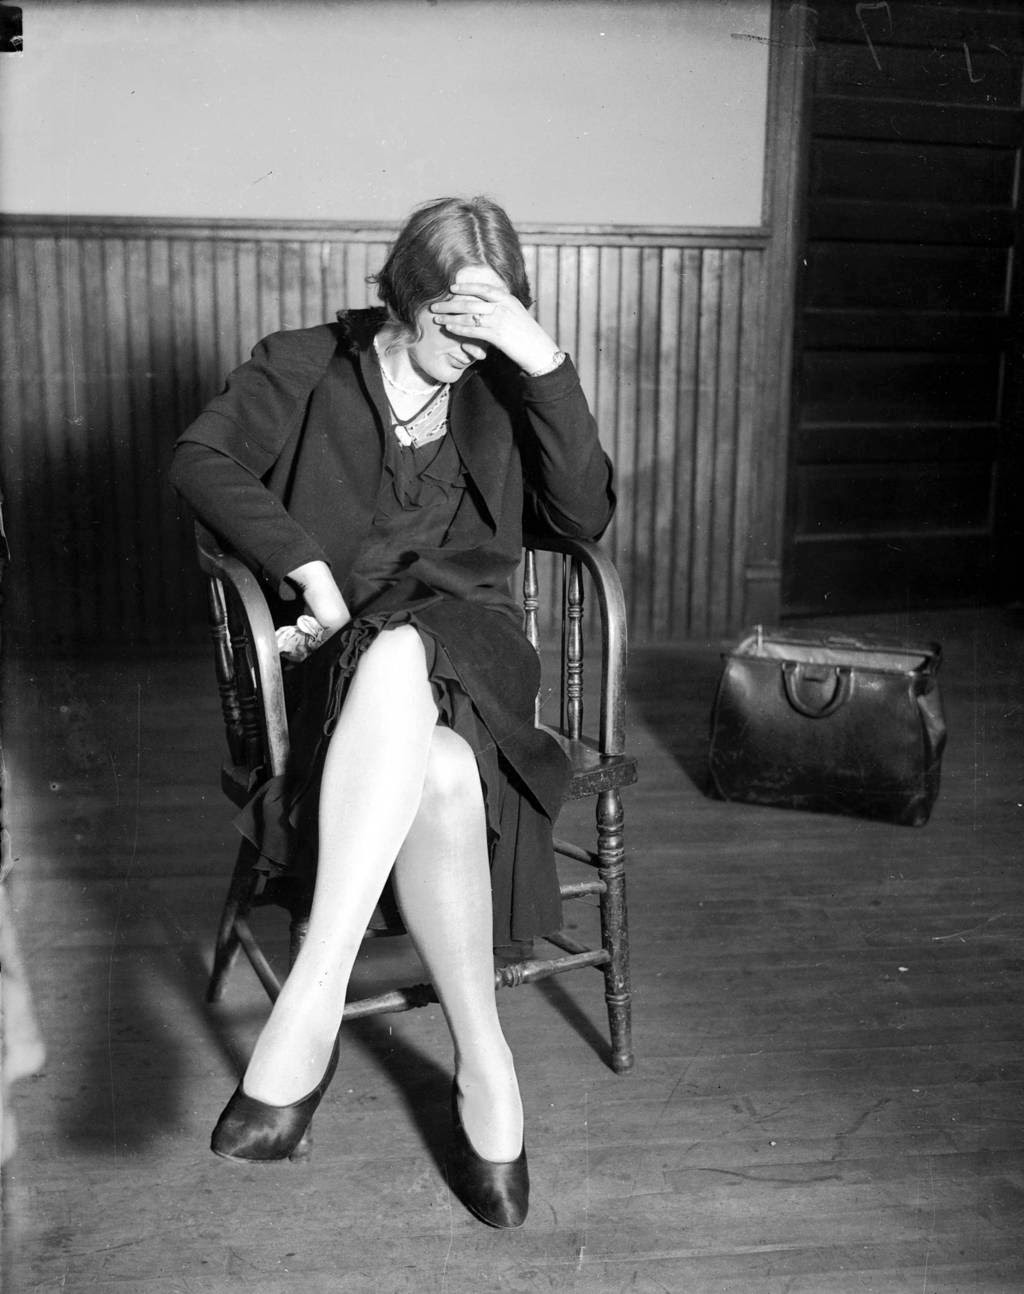 Vintage Photos Of Female Criminals From The Early 20th Century